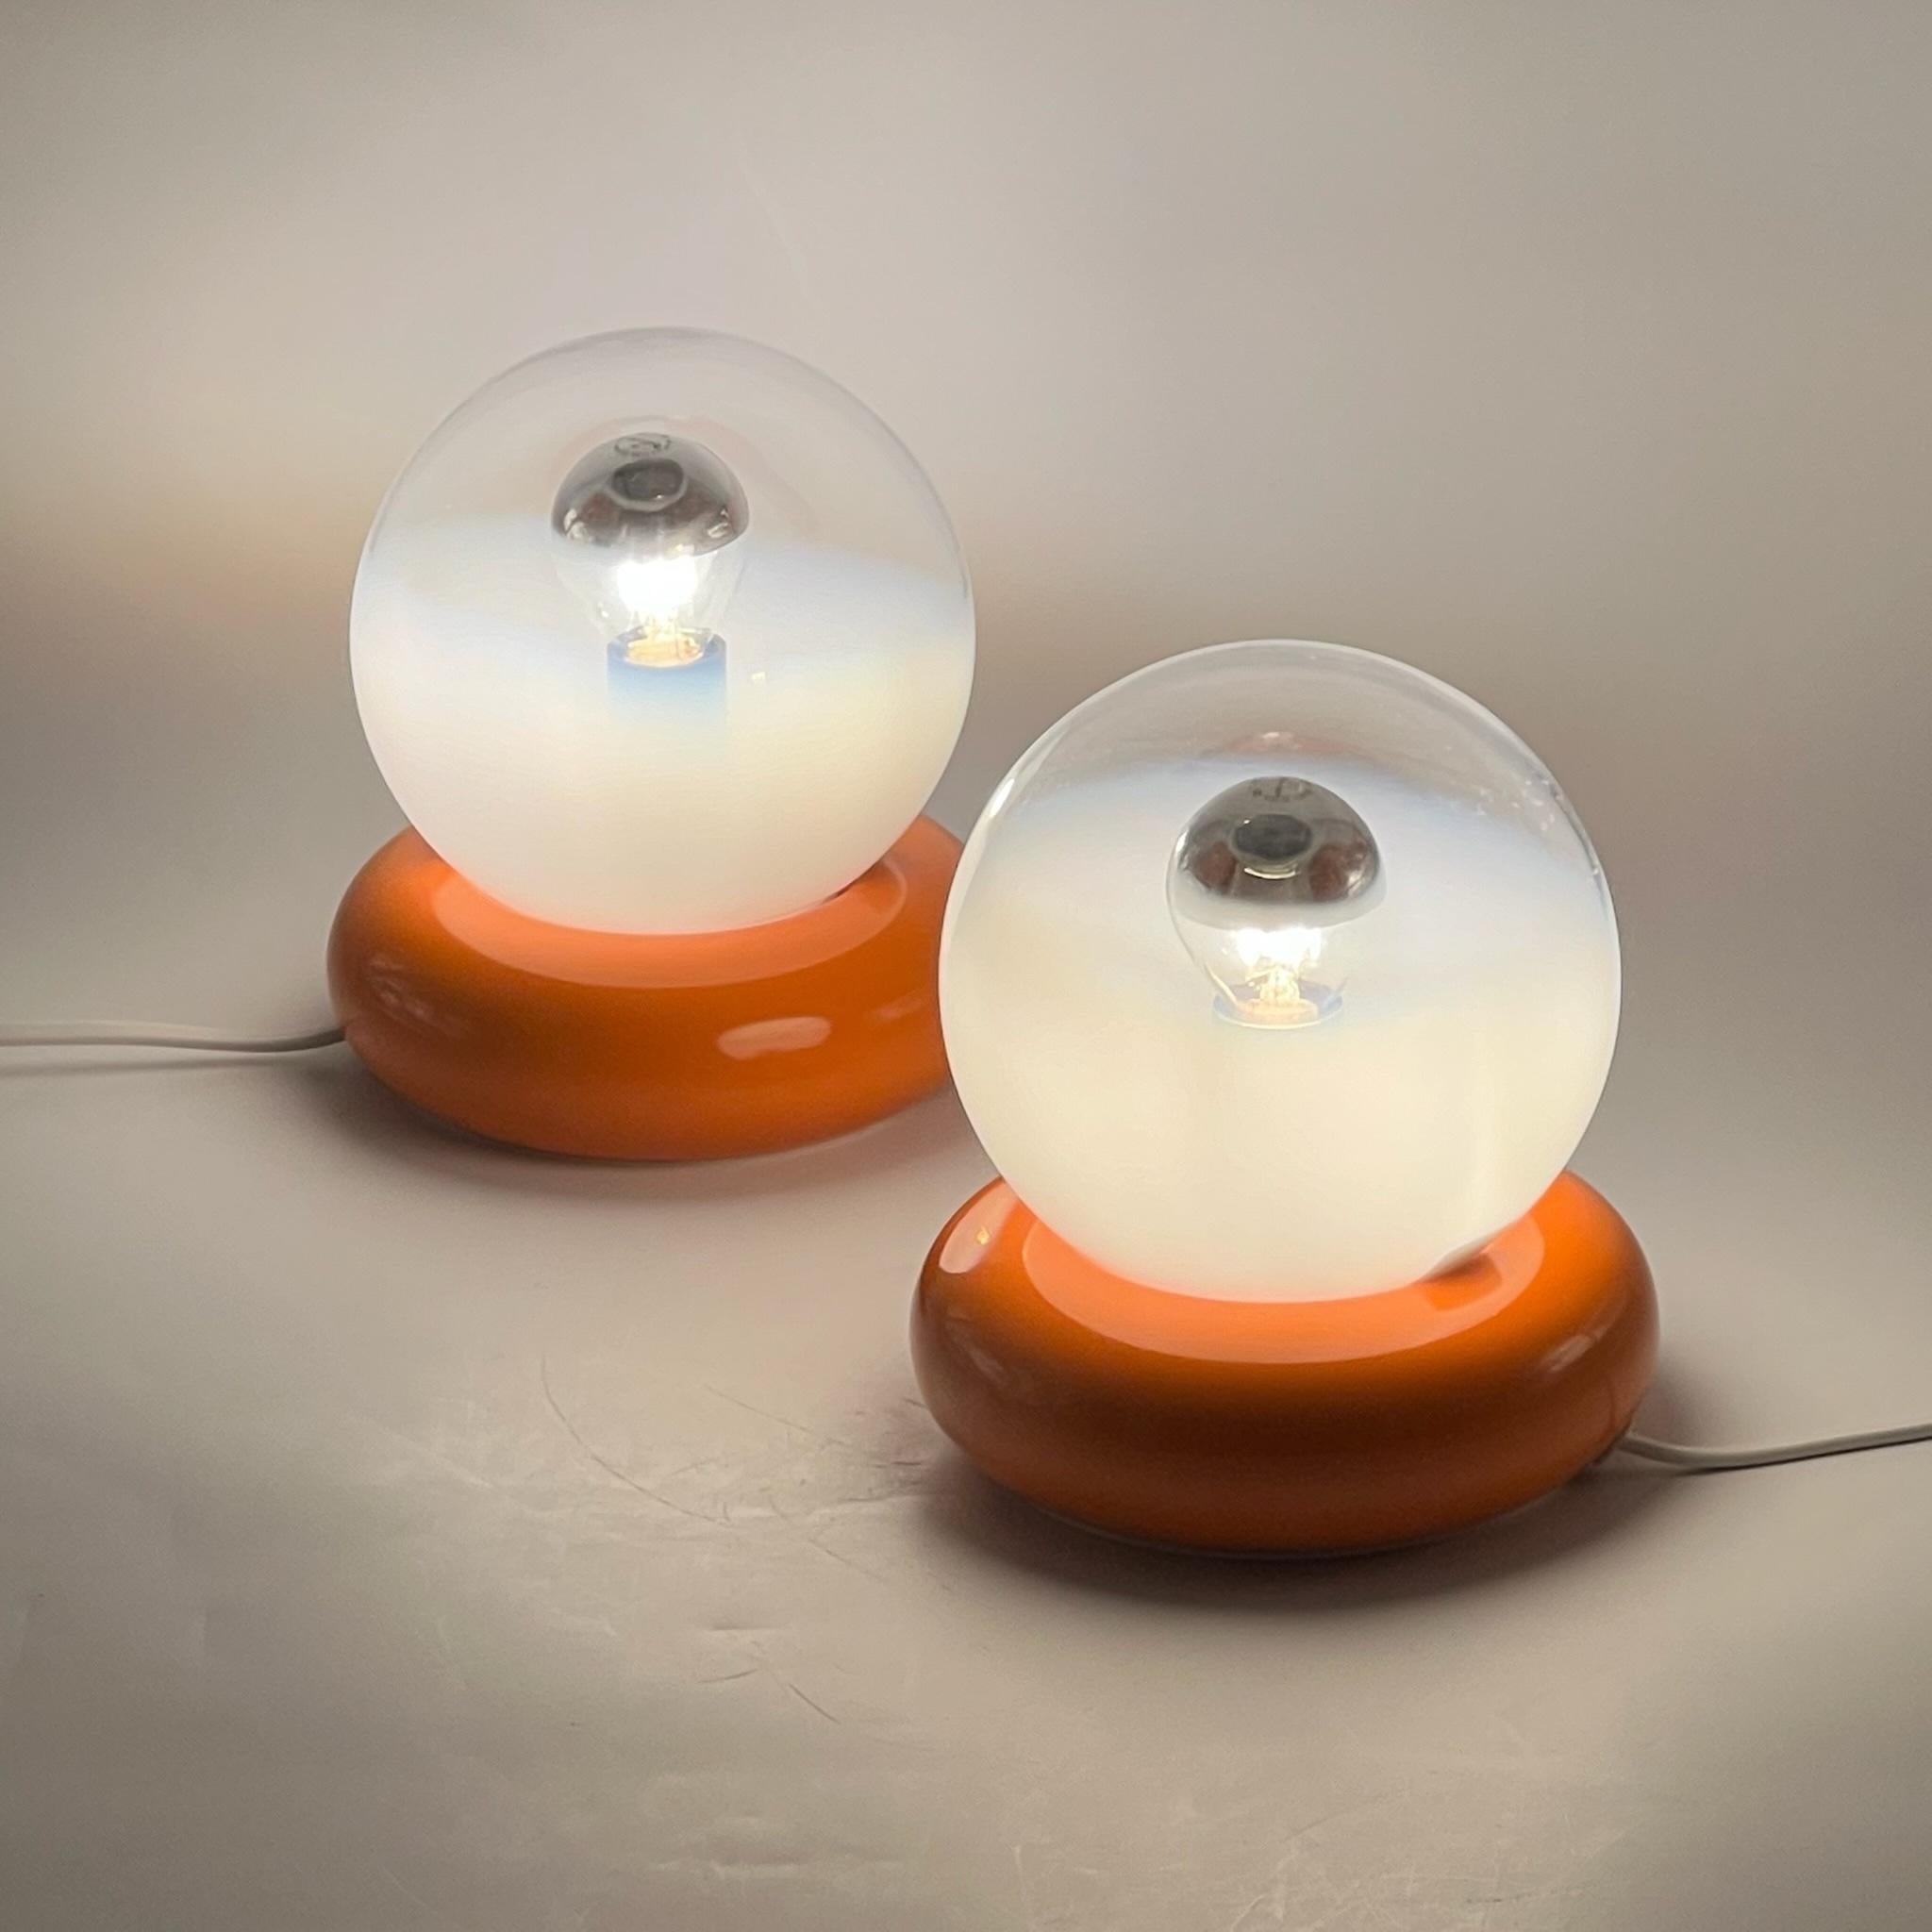 Spruce up your space with this exquisite pair of vintage Targetti Sankey table lamps, showcasing a unique blend of vibrant orange metal bases and handcrafted artistic glass spheres. The glass globes are transparent with subtle white shading,